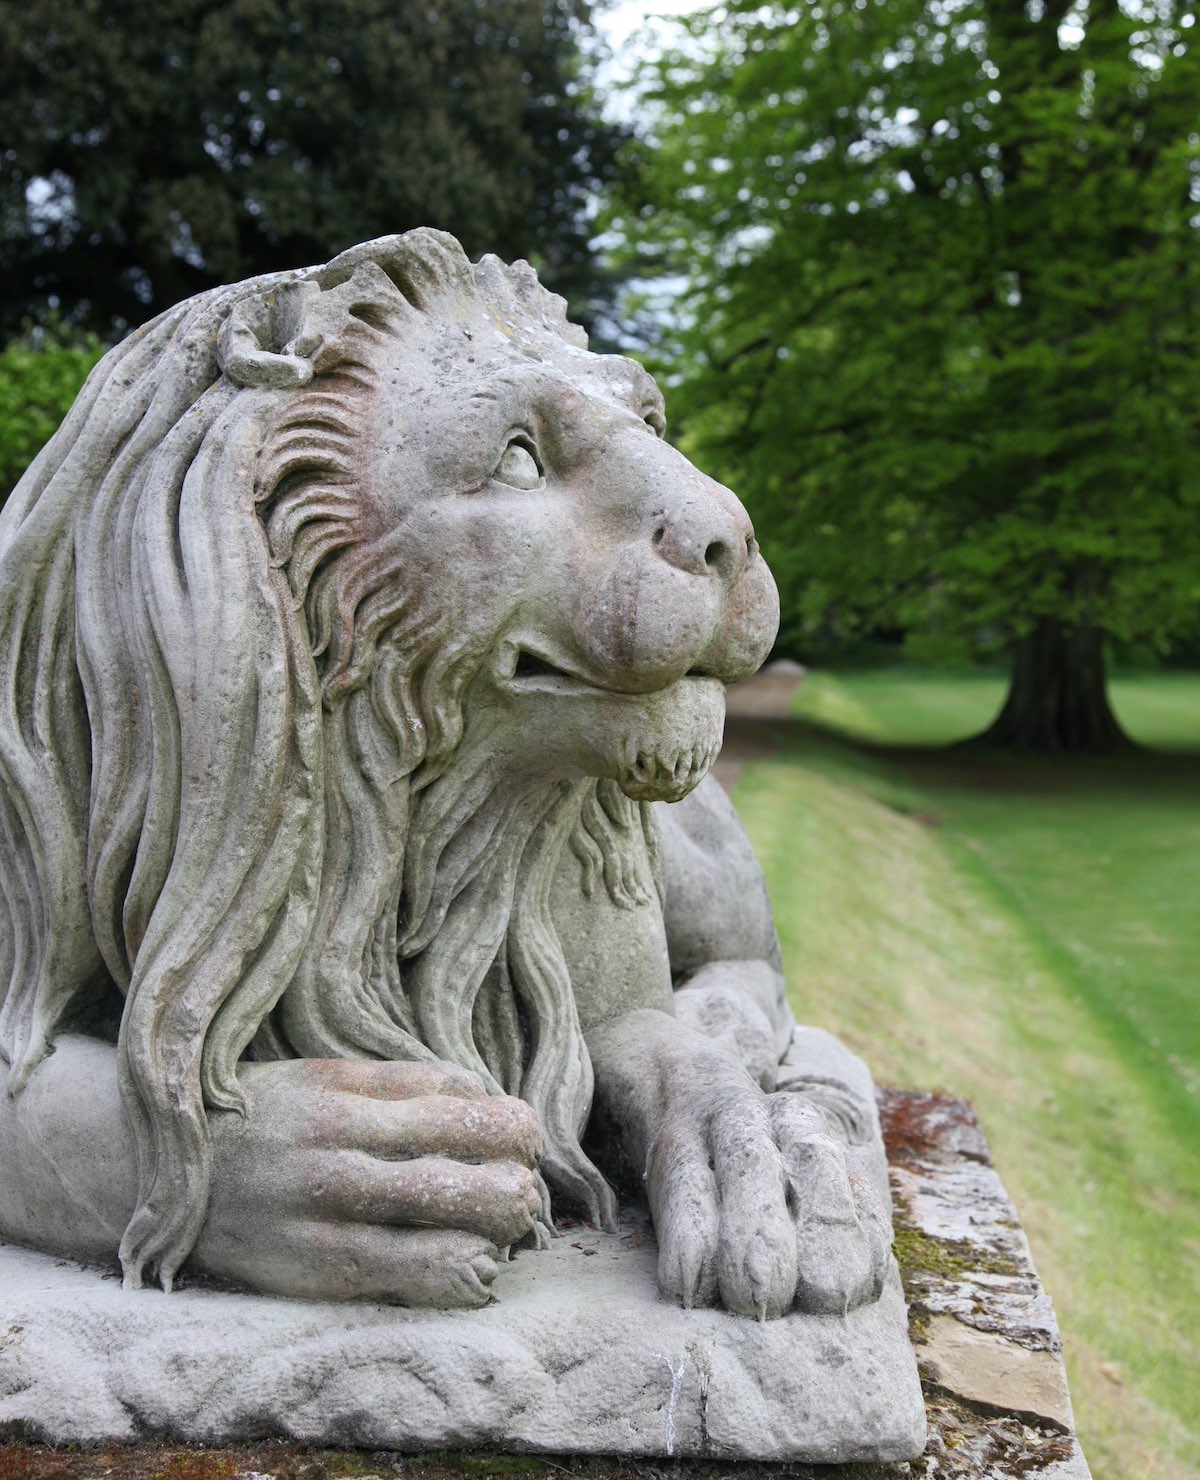 Lion sculpture in the gardens at Ditchley